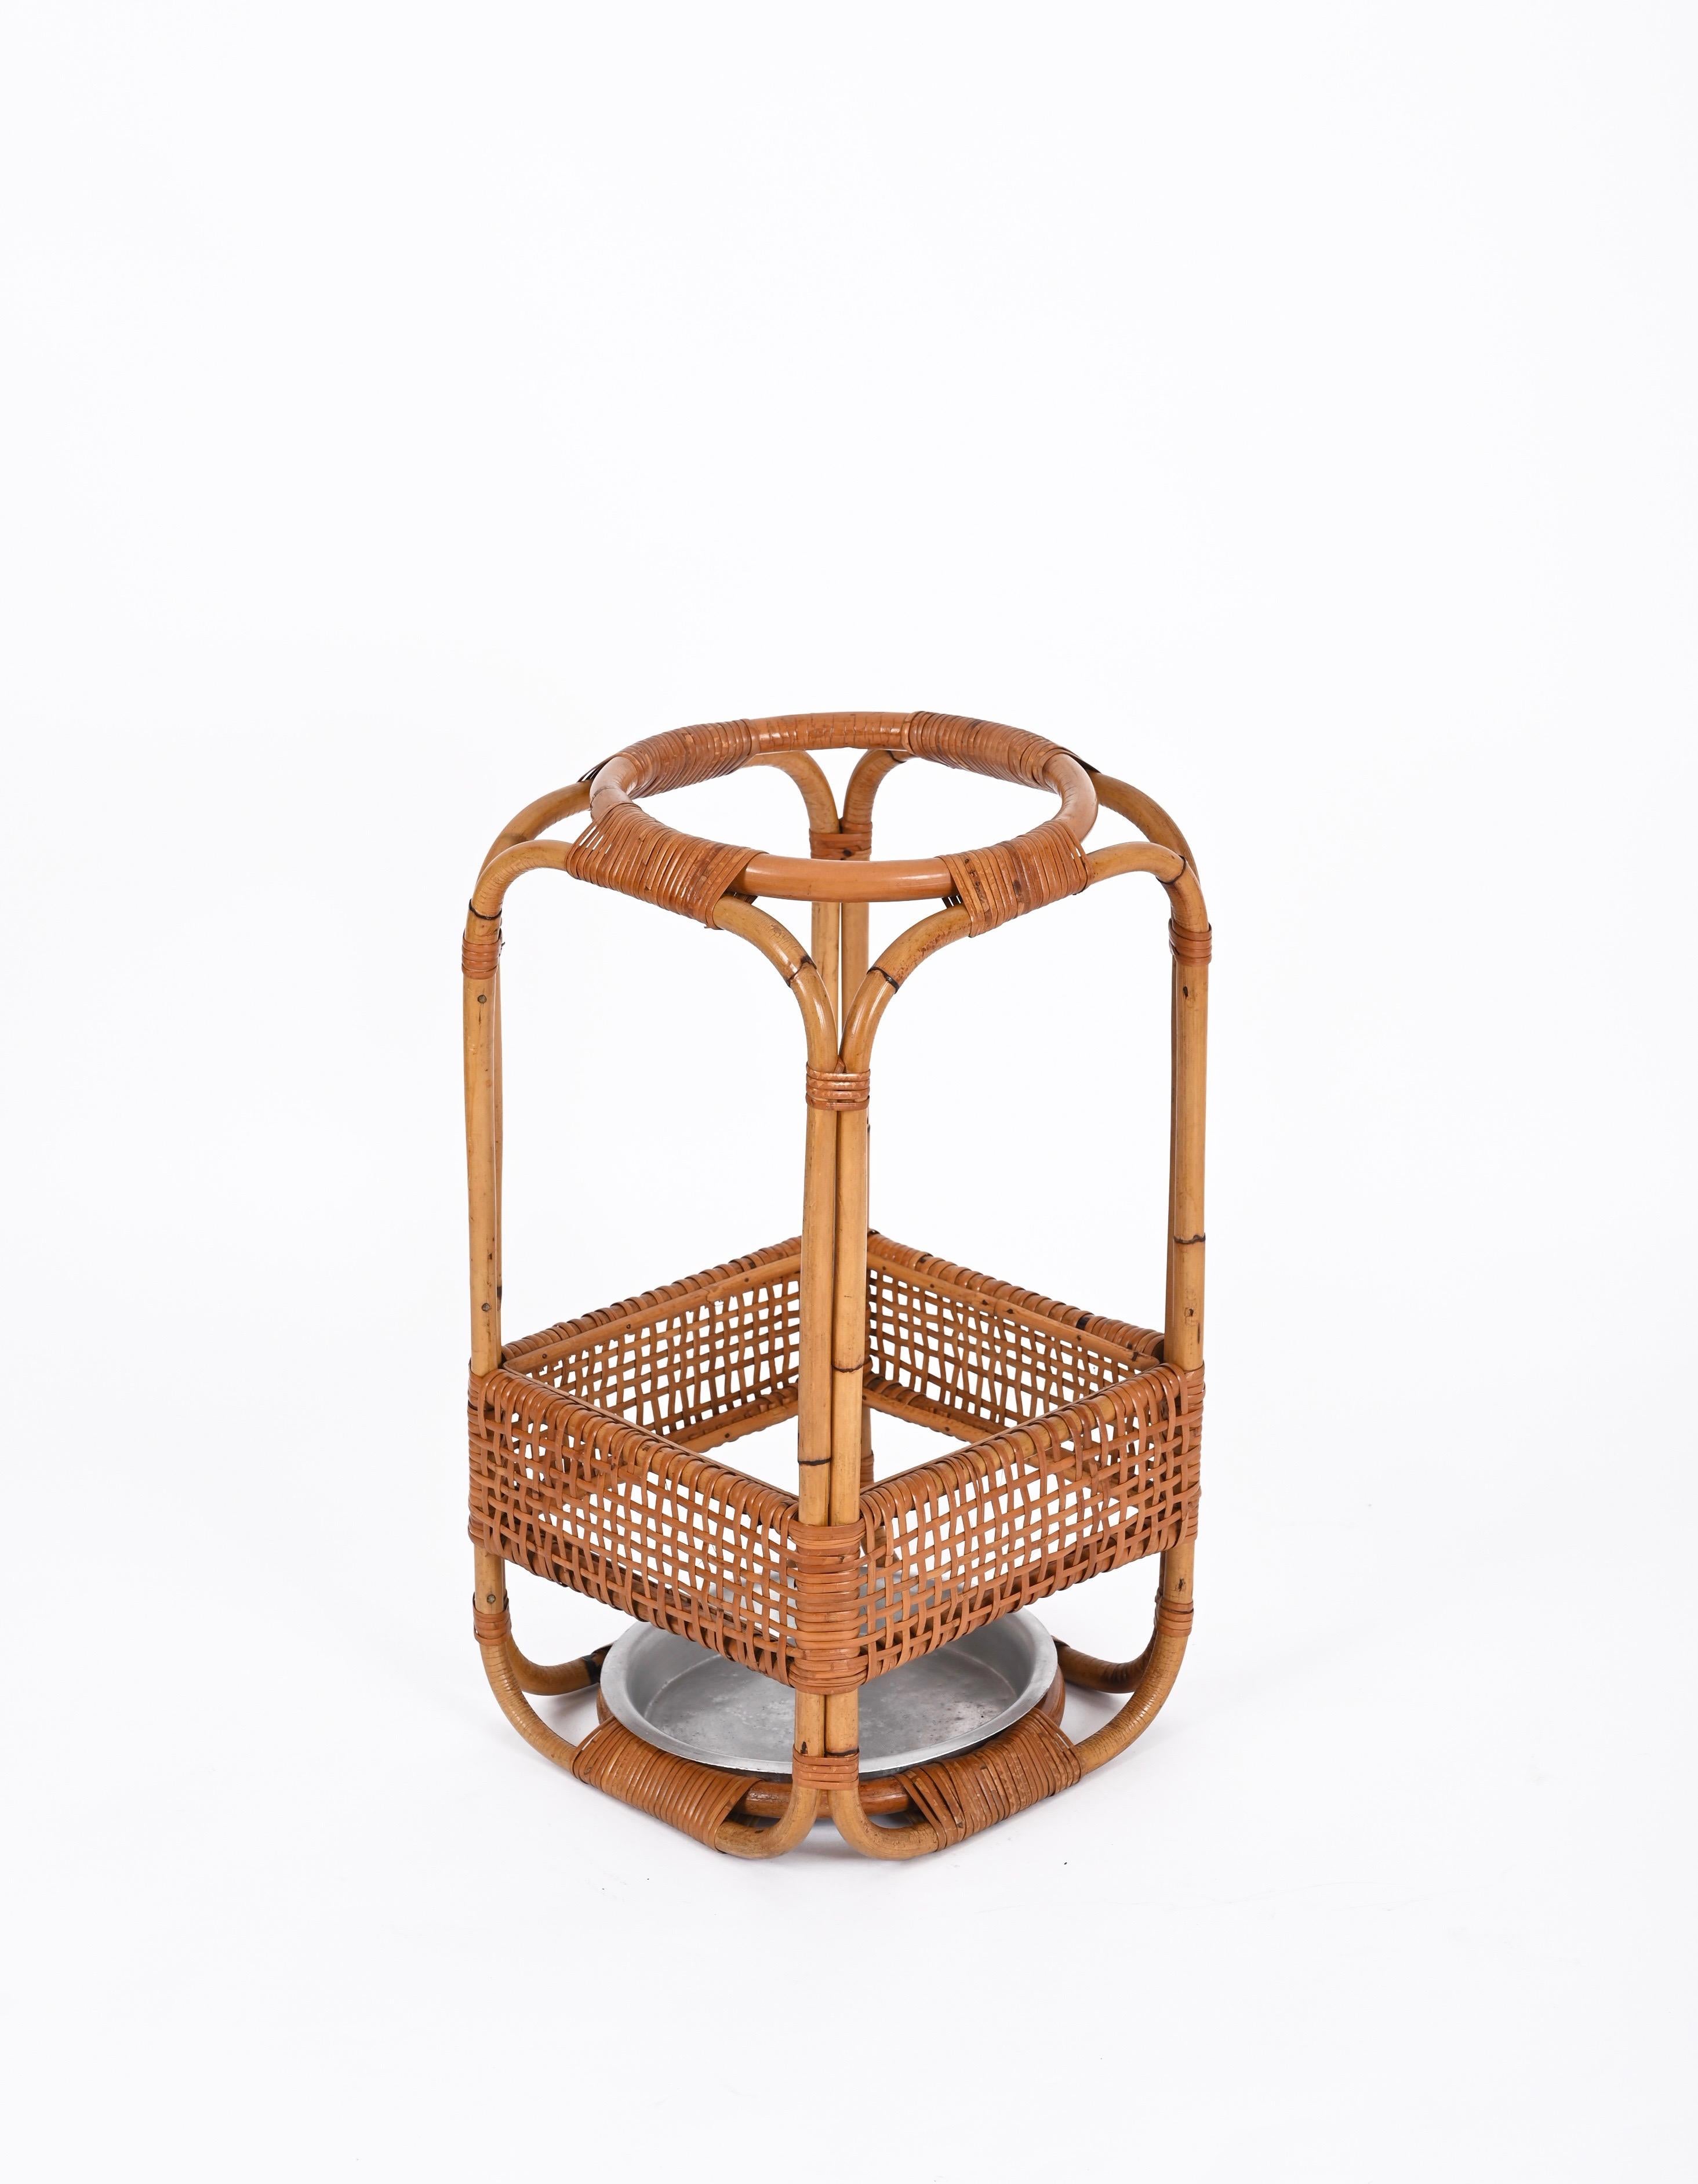 Bamboo and Wicker Umbrella Stand in the Style of Franco Albini, Italy, 1960s For Sale 11